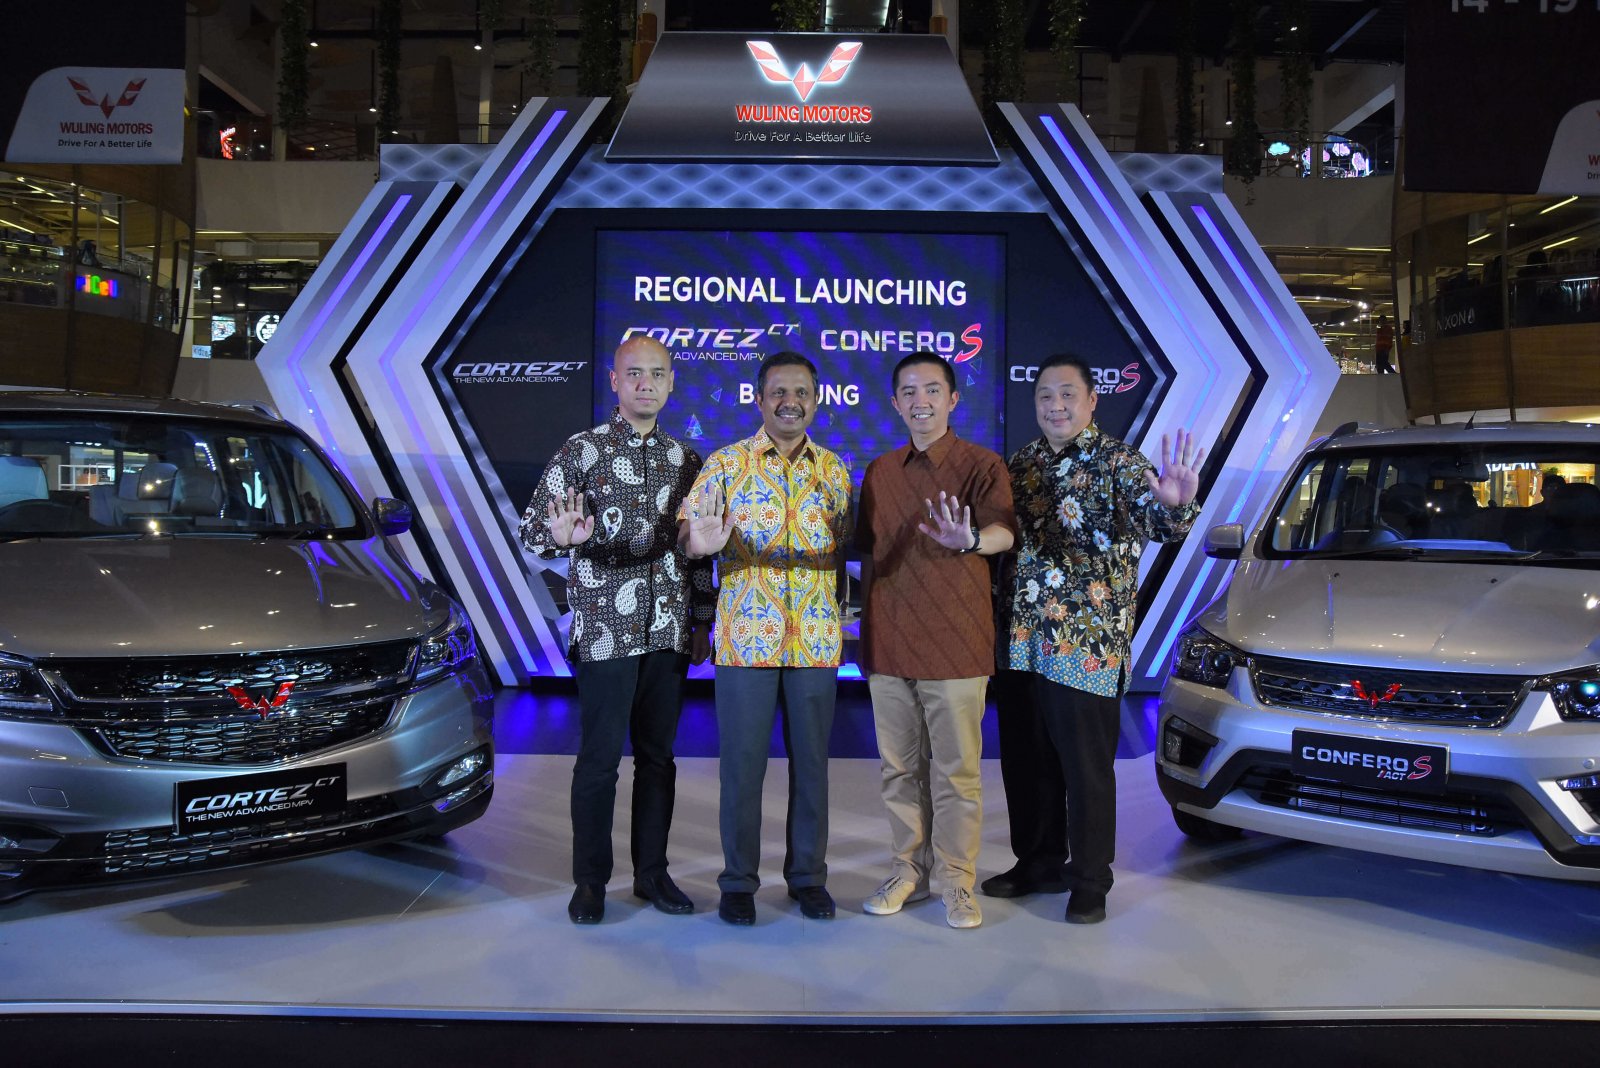 Image Wuling Starts to Market Cortez CT and Confero S ACT in Bandung